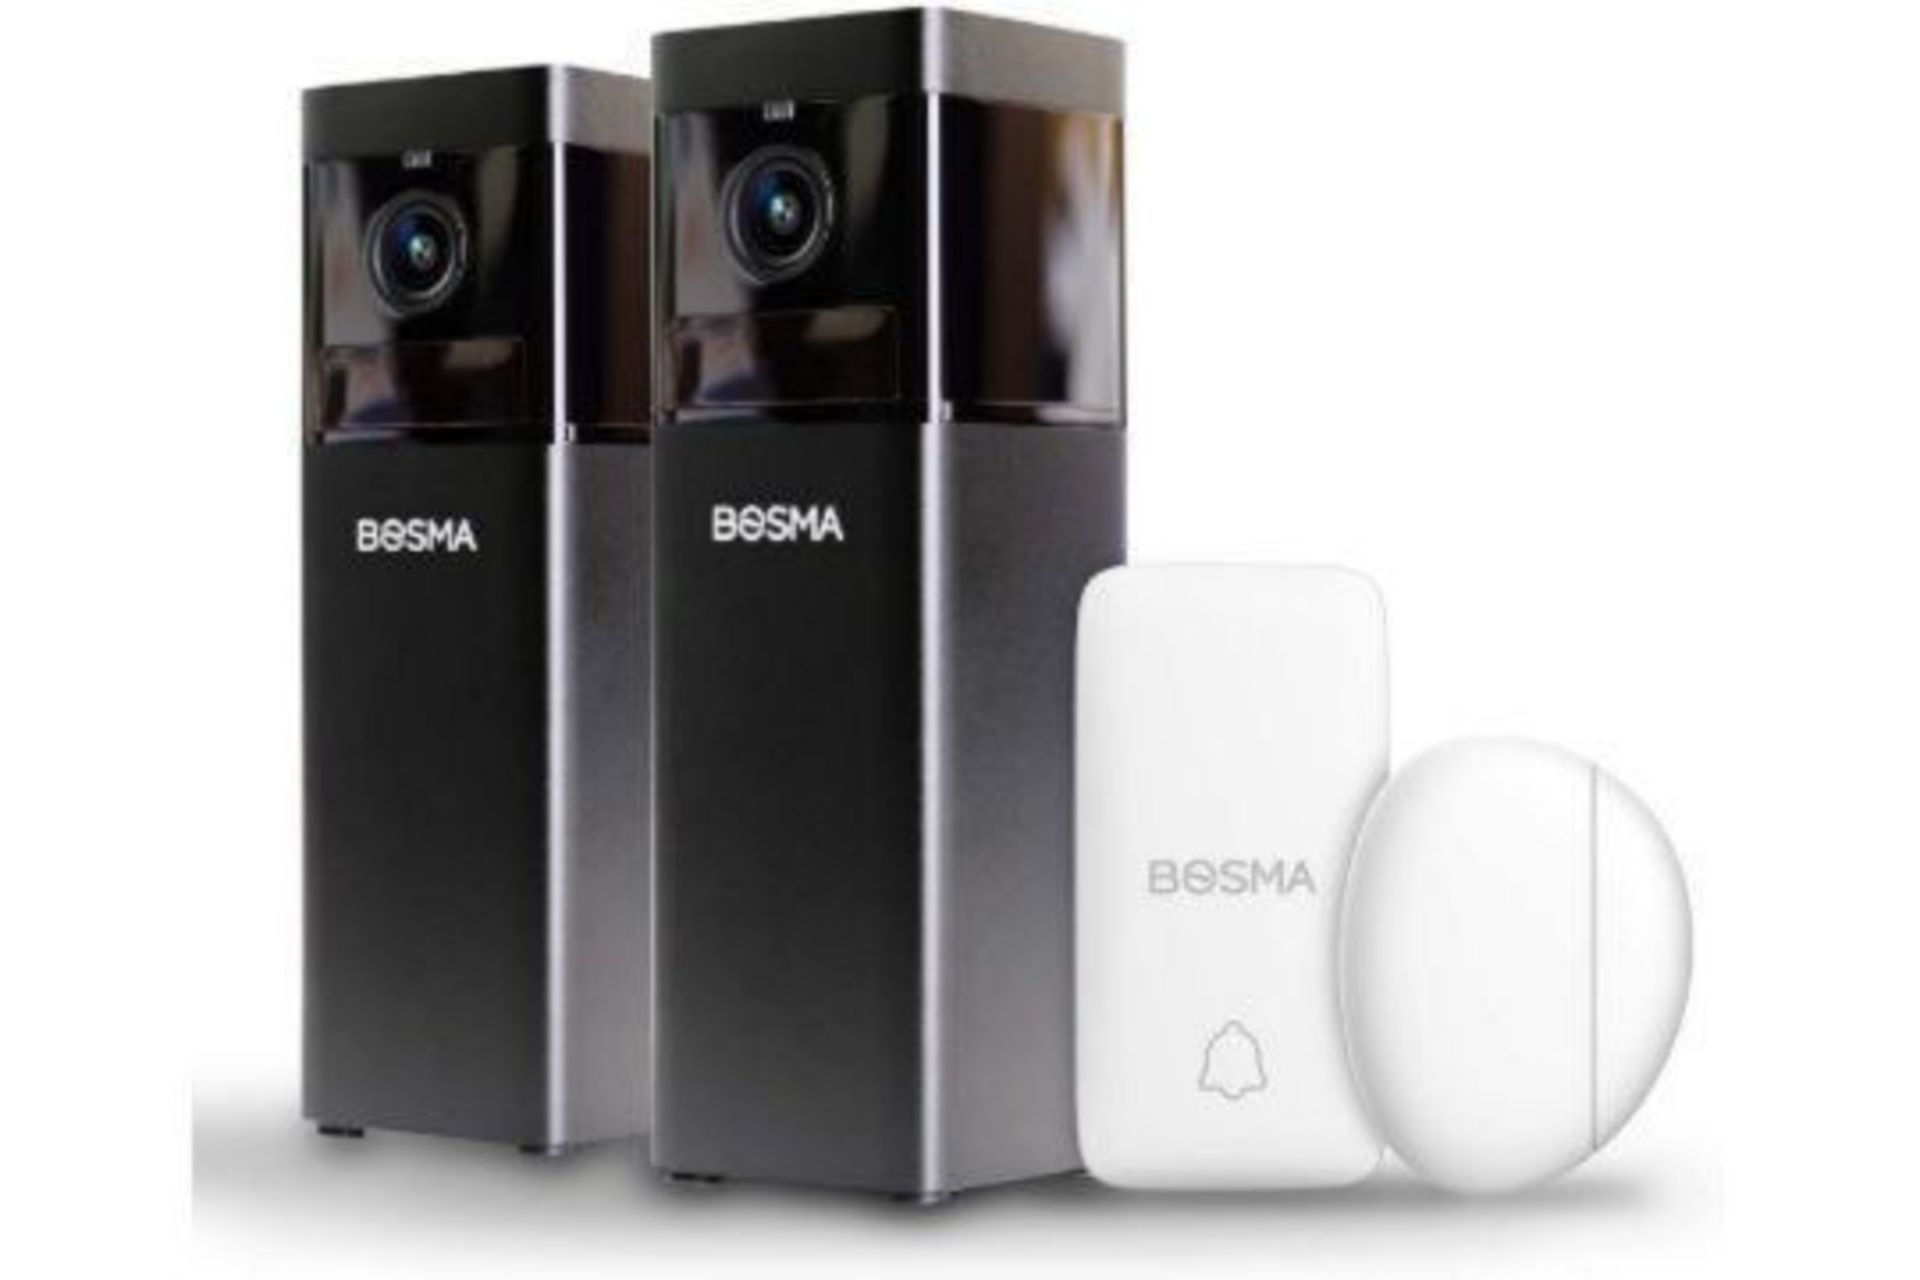 BRAND NEW BOSMA HOME SECURITY CAMERA WITH SMART BUTTON AND DOOR/WINDOW SENSORS, COLOUR NIGHT VISION,